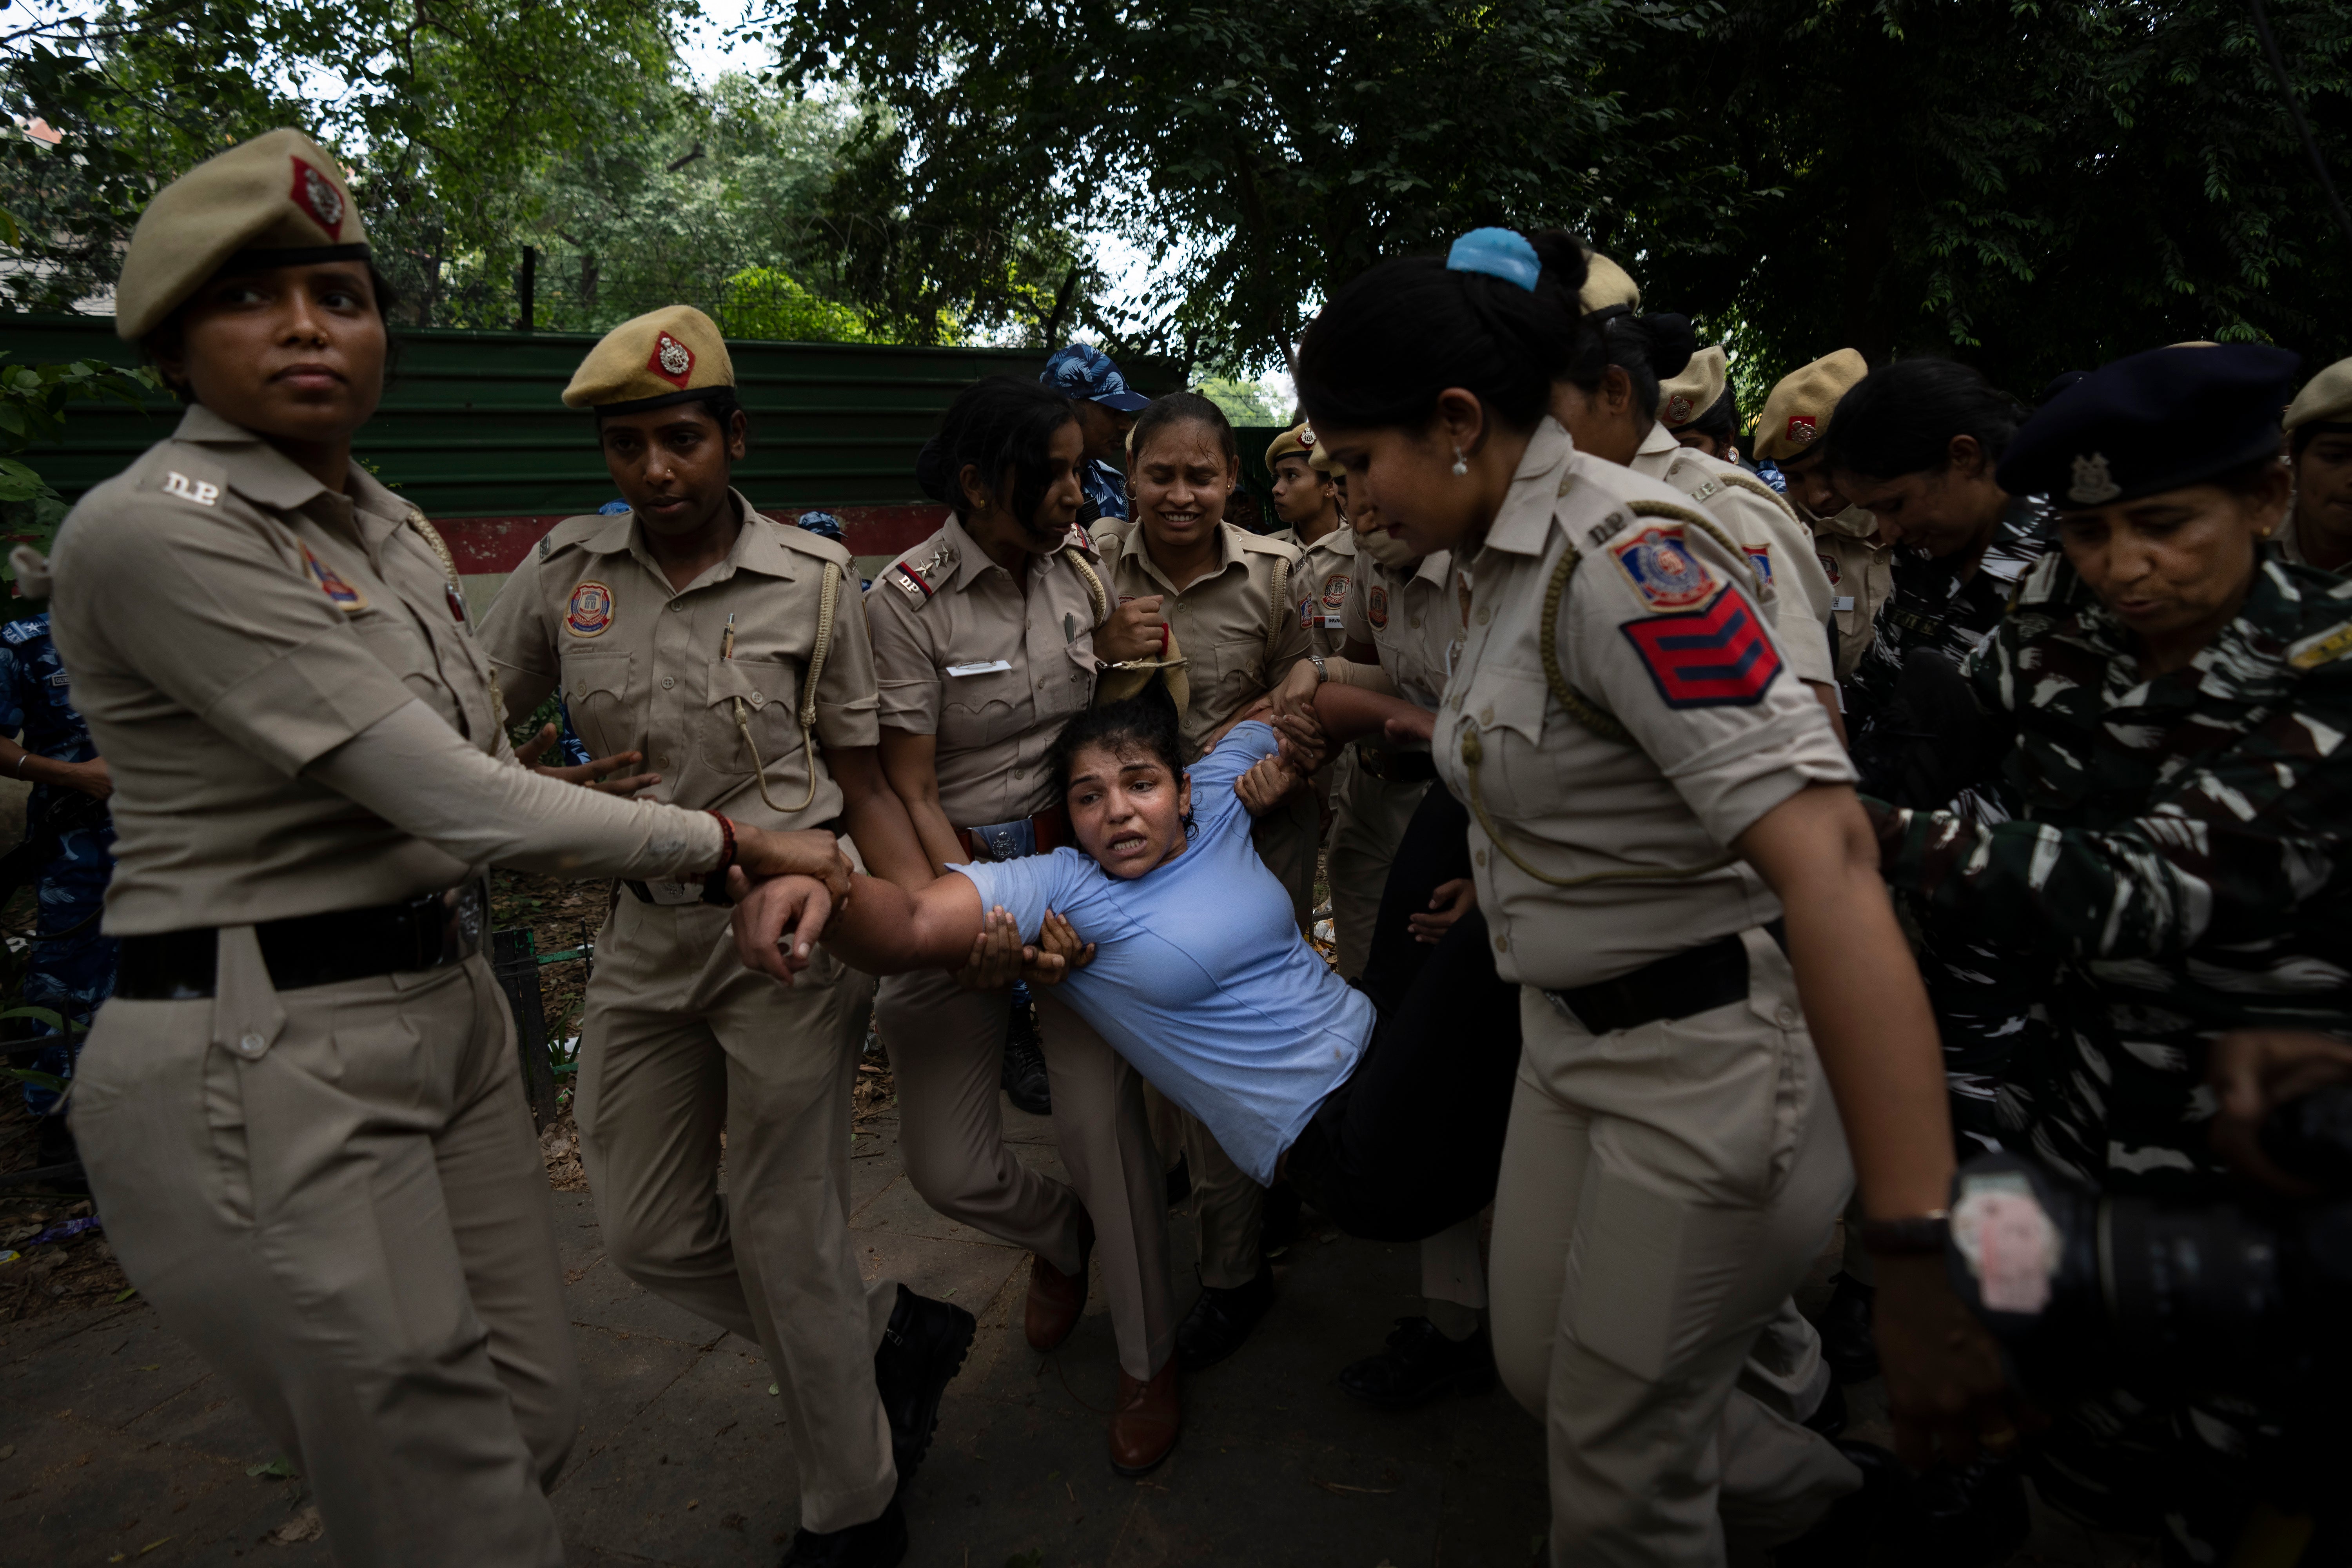 Sakshi Malik, an Indian wrestler who won a bronze medal at the 2016 Summer Olympics, is detained by the police during a protest against Brij Bhushan Sharan Singh, the president of the Wrestling Federation of India, in New Delhi